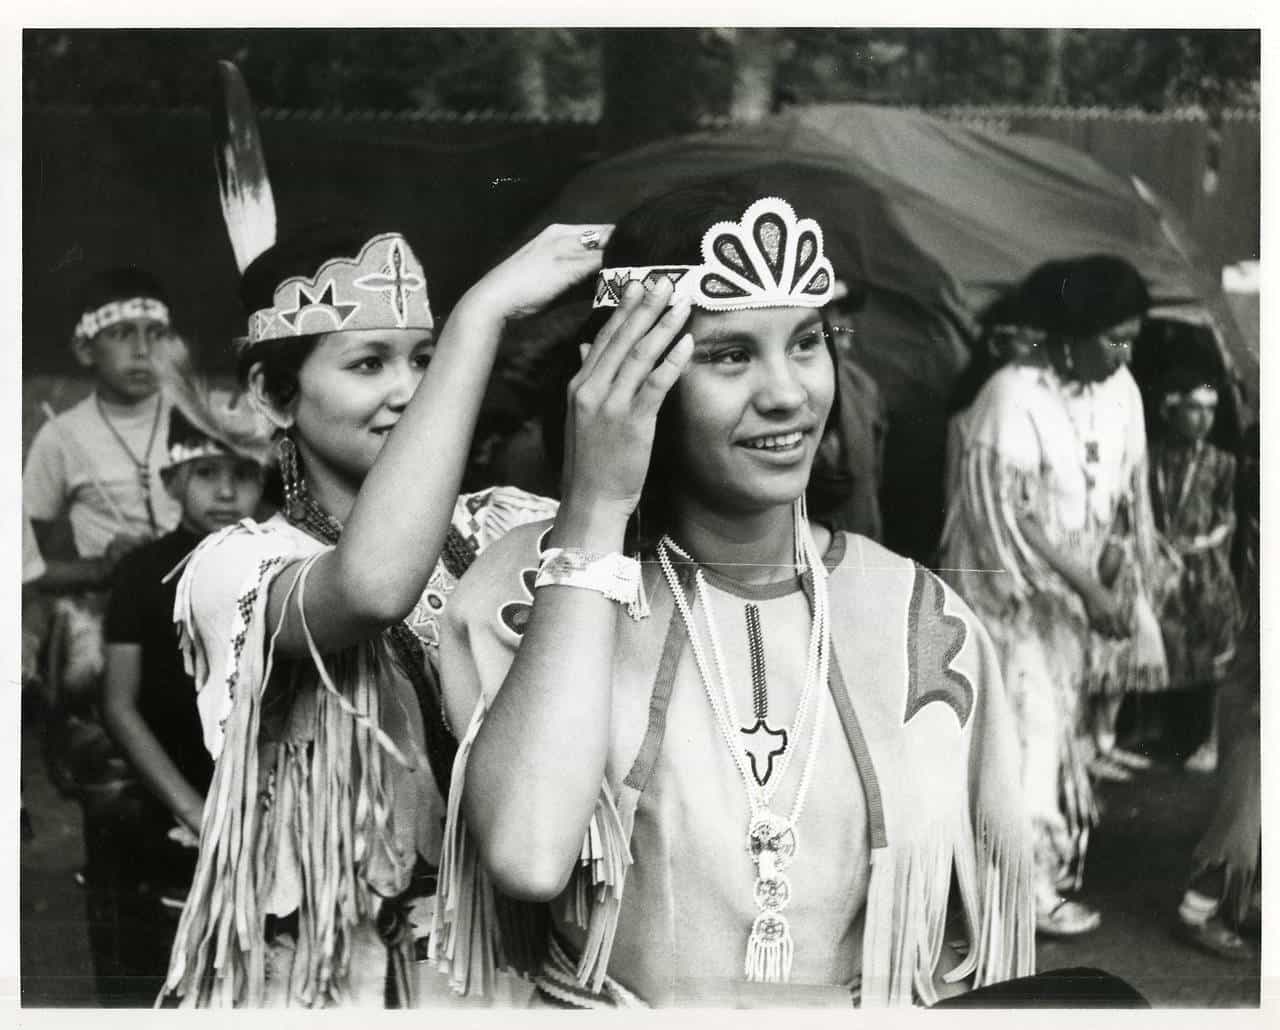 Karen Washinawatok being crowned Miss Menominee, Keshena. The Phillip and Faith Sealy Collection on the Menominee Arts, College of Menominee Nation S. Verna Fowler Academic Library/Menominee Public Library.